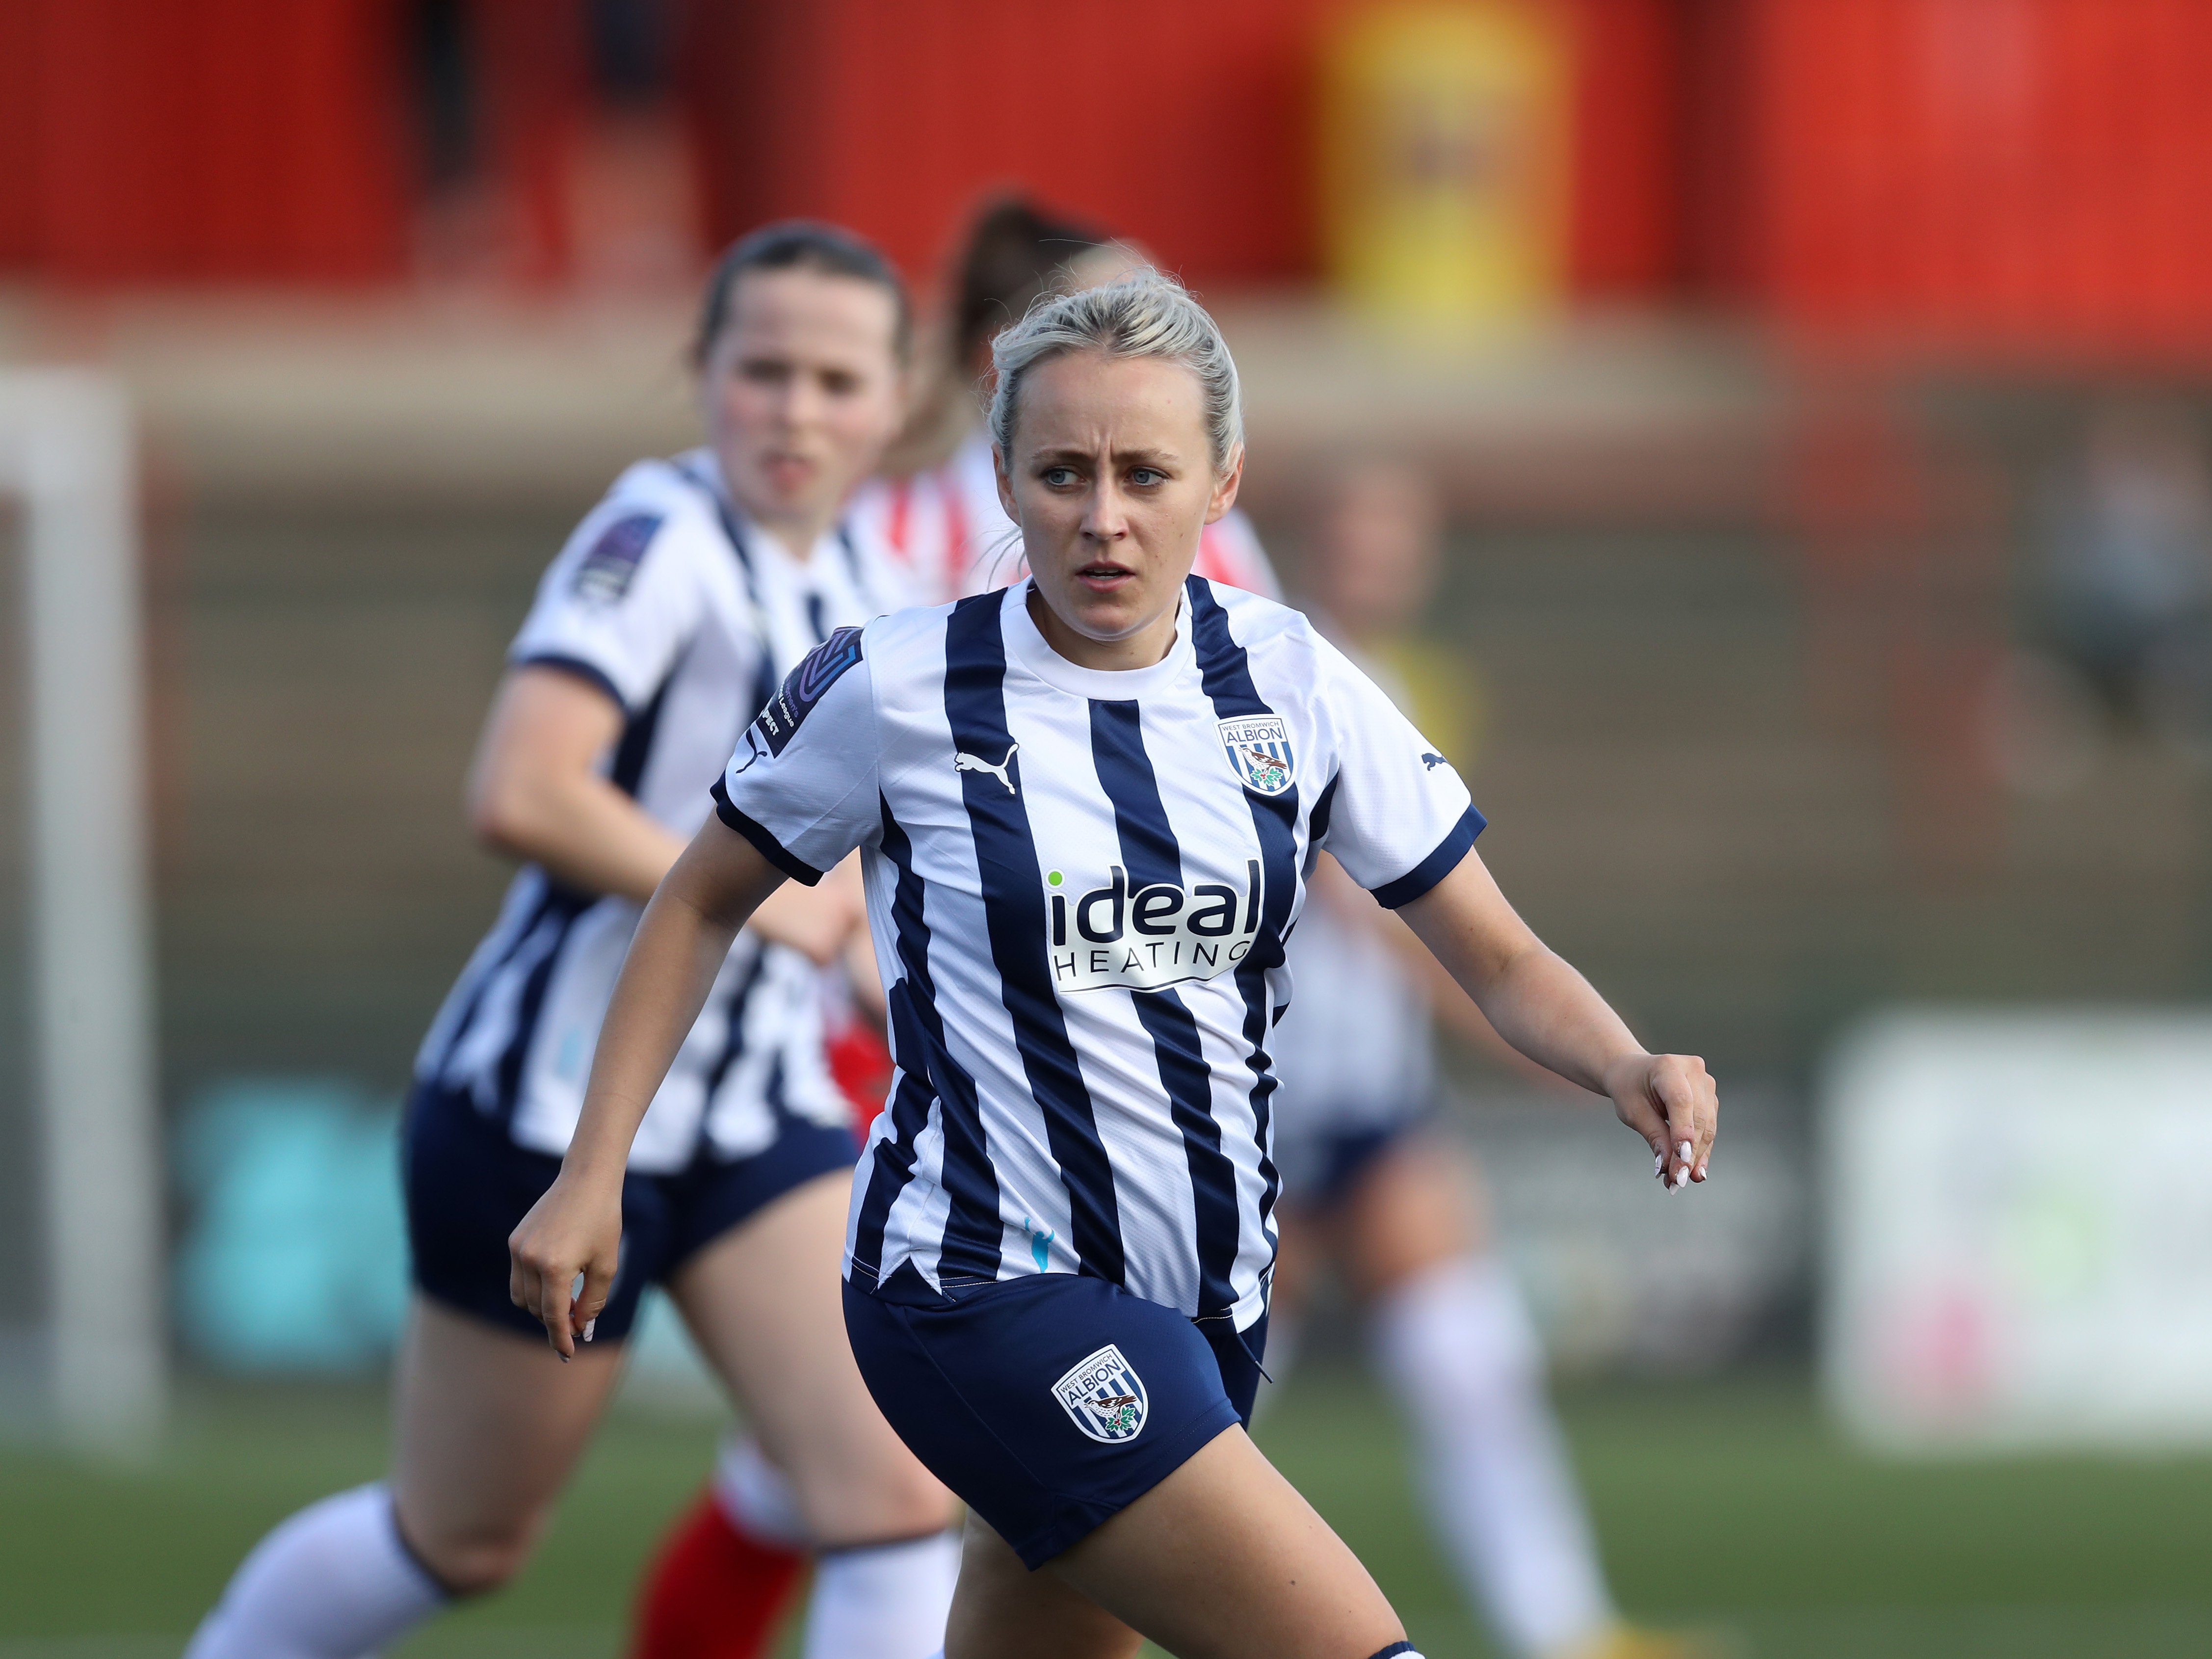 Kerry Walklett in action in the home kit for Albion Women 